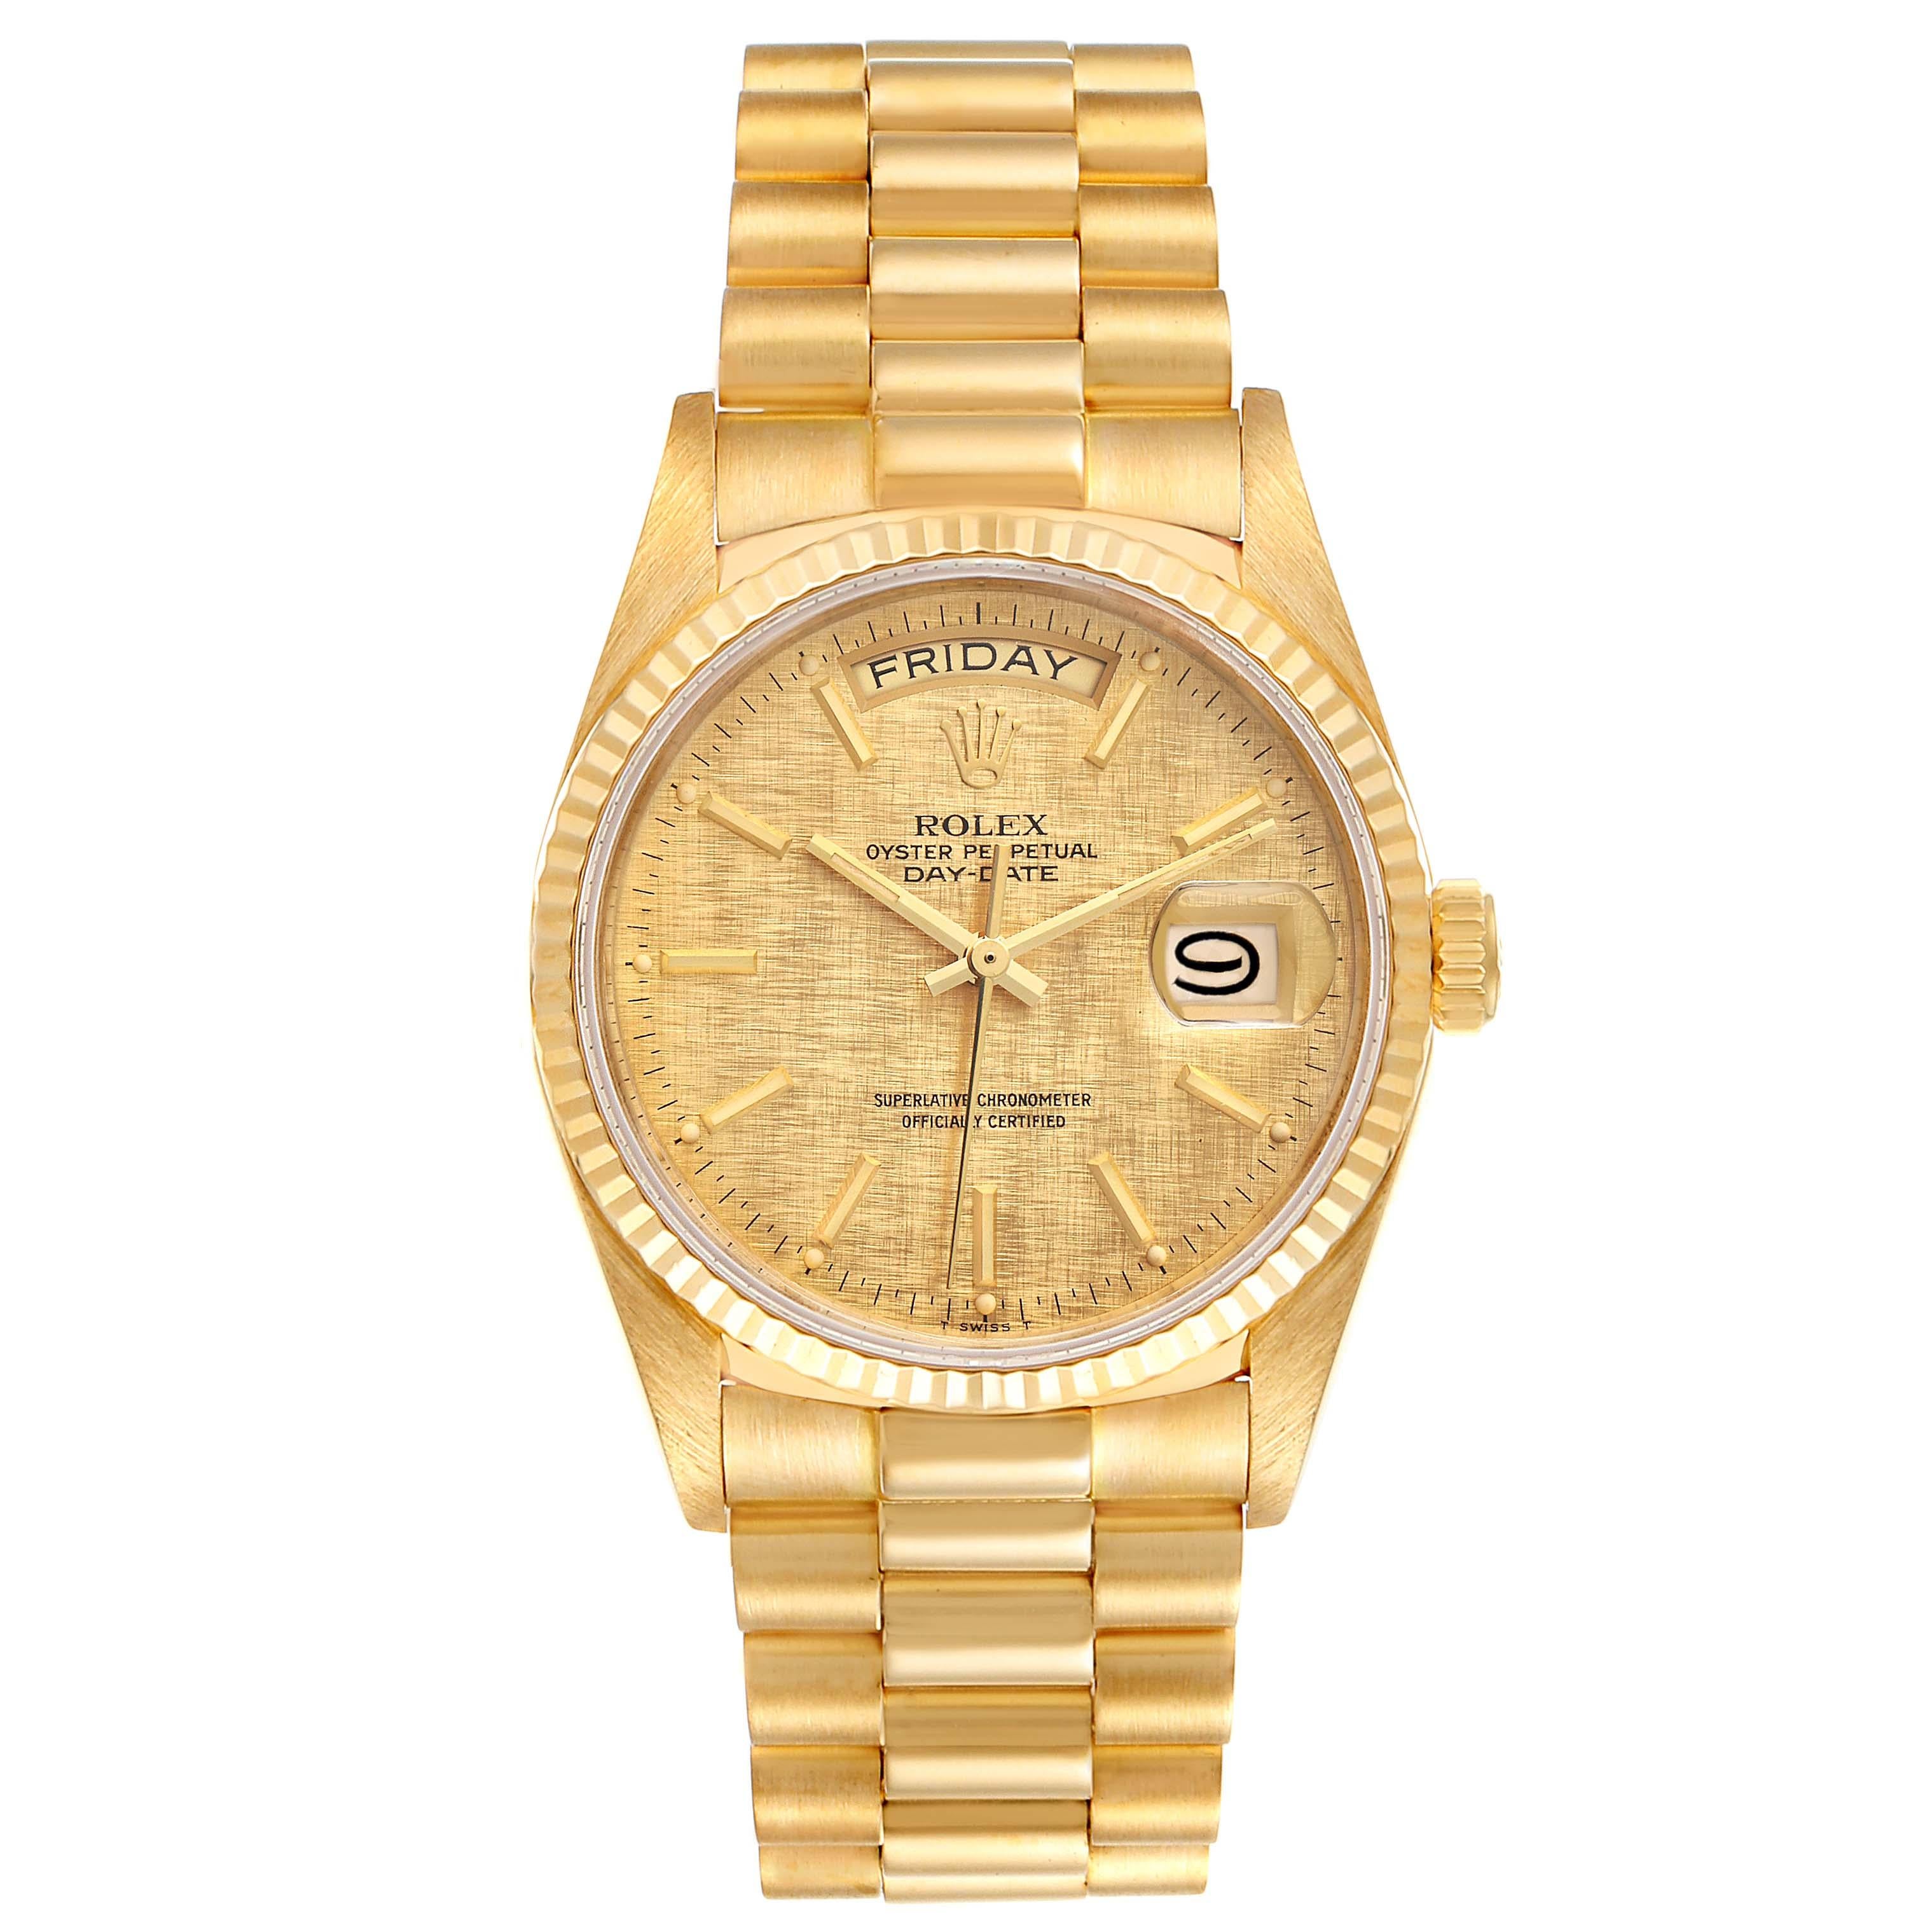 Rolex President Day-Date Yellow Gold Linen Dial Mens Watch 18038 In Excellent Condition For Sale In Atlanta, GA